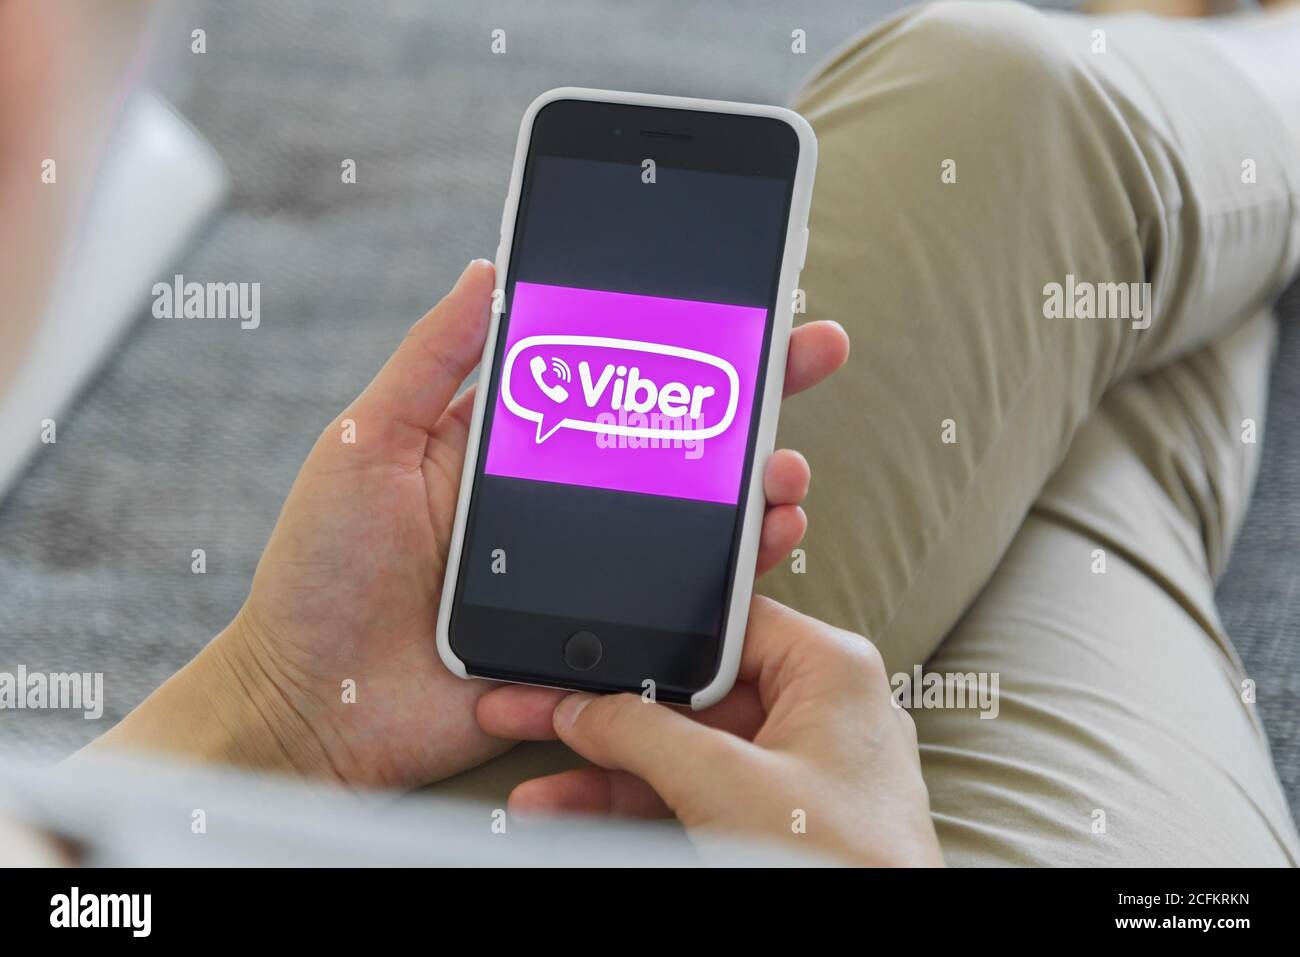 Woman holding a iPhone 7 with client messaging and voice service Viber on the screen. Stock Photo